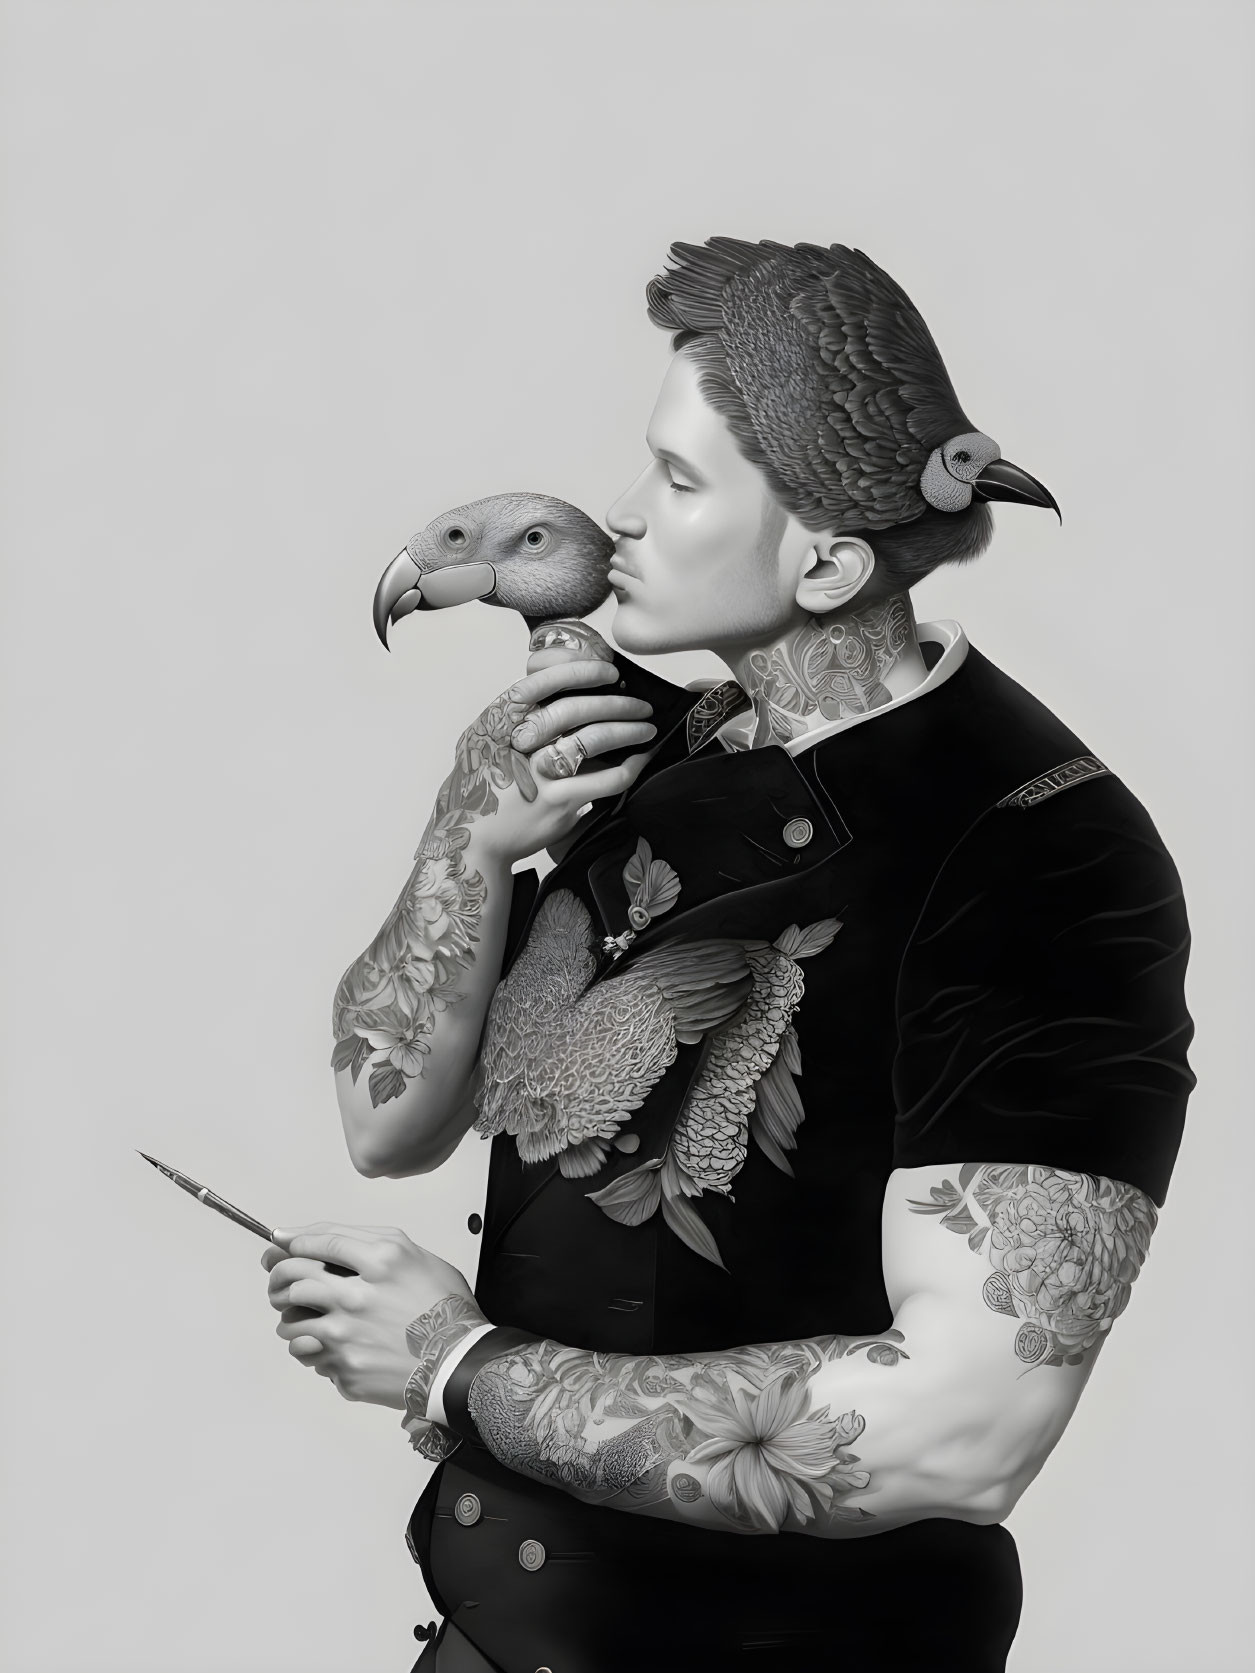 Monochrome tattooed person in black outfit with parrot on hand